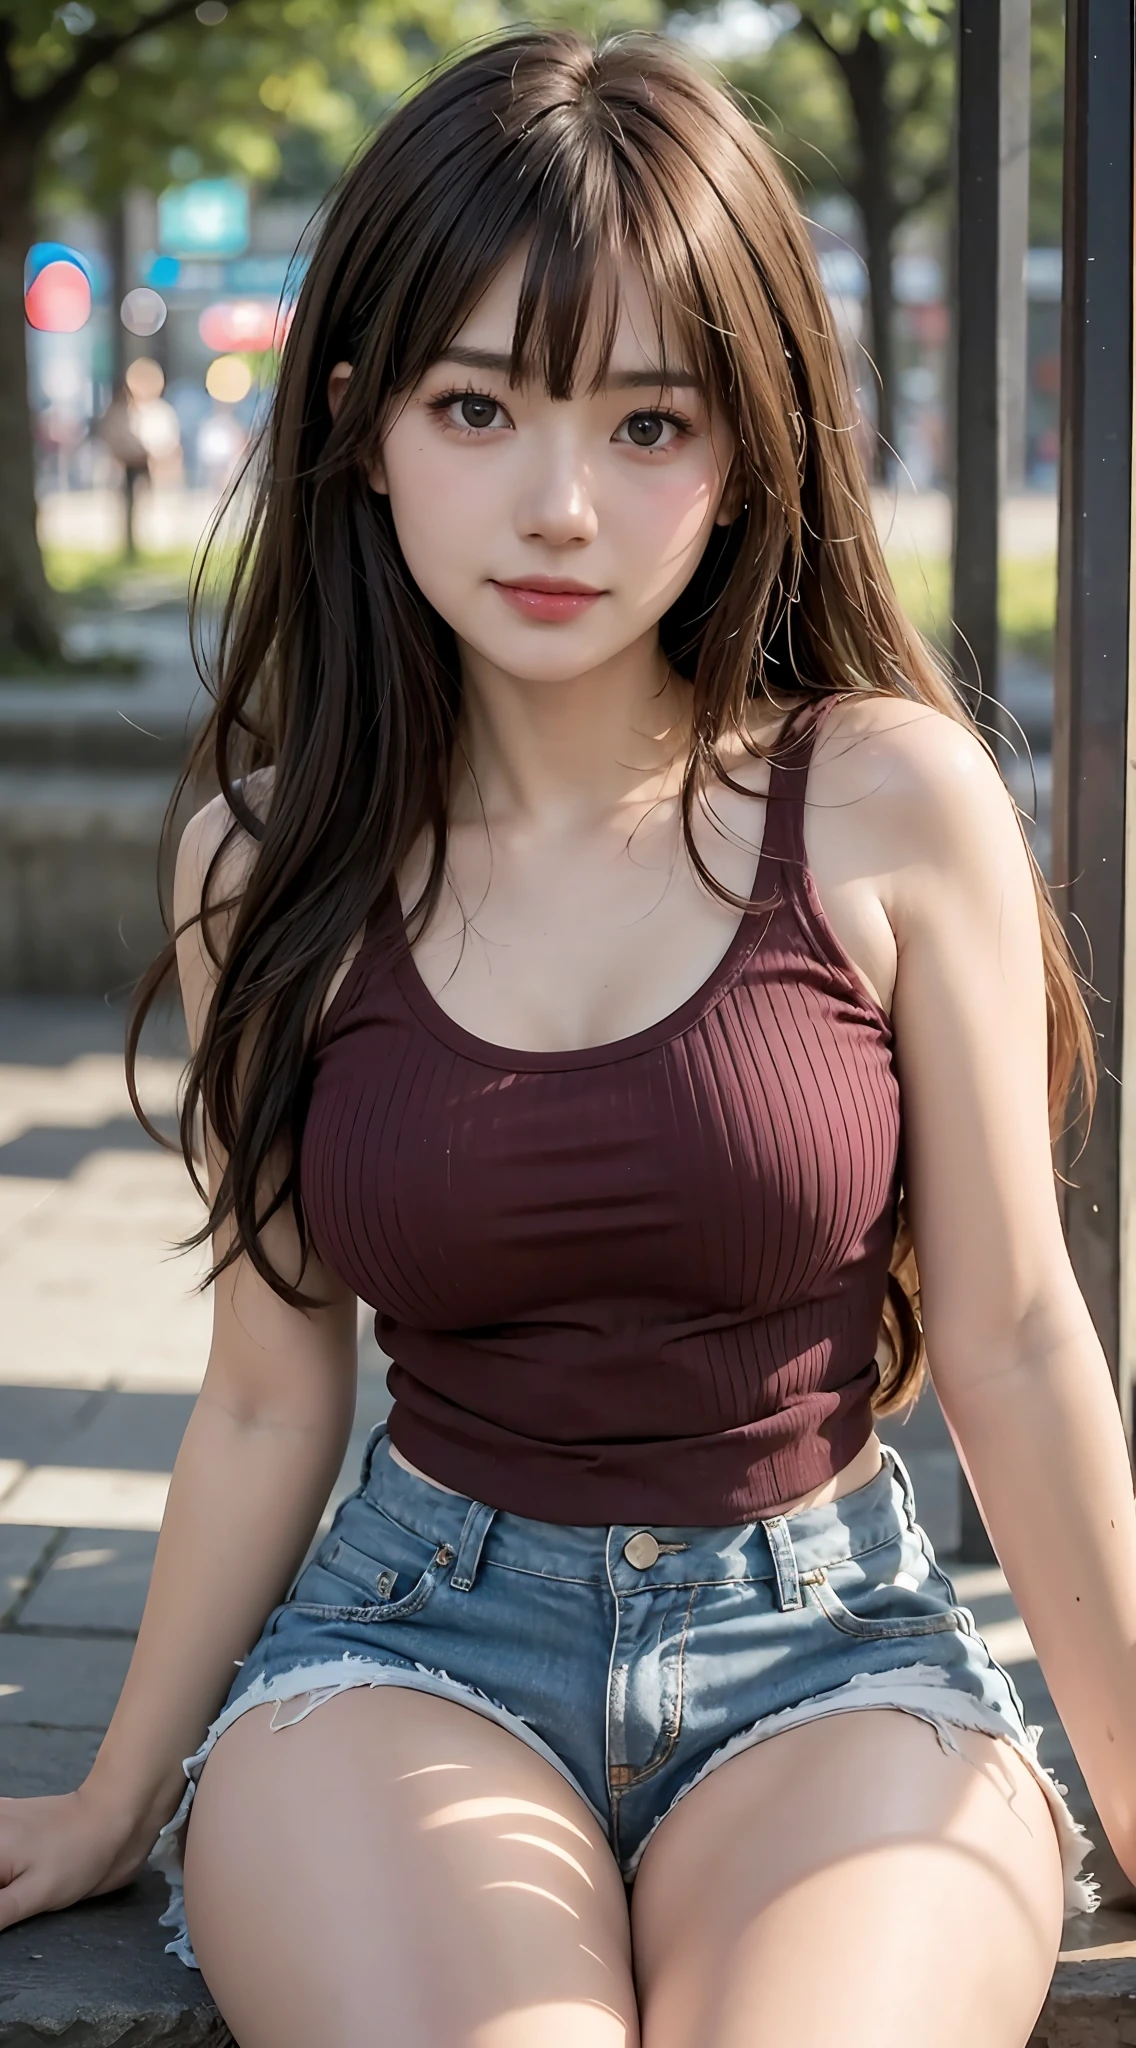 (Masterpiece, Best Quality, Beautiful Girl, Beautiful Face, 8K, Raw Photo), Japan Student, High School, Teen, Sitting in the Park, Tank Top, Shorts, Slender, Smile, Buckshot, Buttocks, (Dynamic Lighting, Dramatic Lighting, Film Lighting:1.2), Sunlight, No Makeup, Natural, Film Grain, Chromatic Aberration, Photorealistic, High Resolution, Ultra Detail, Fine Detail, Sharp Focus, detailed skin and eyes and face